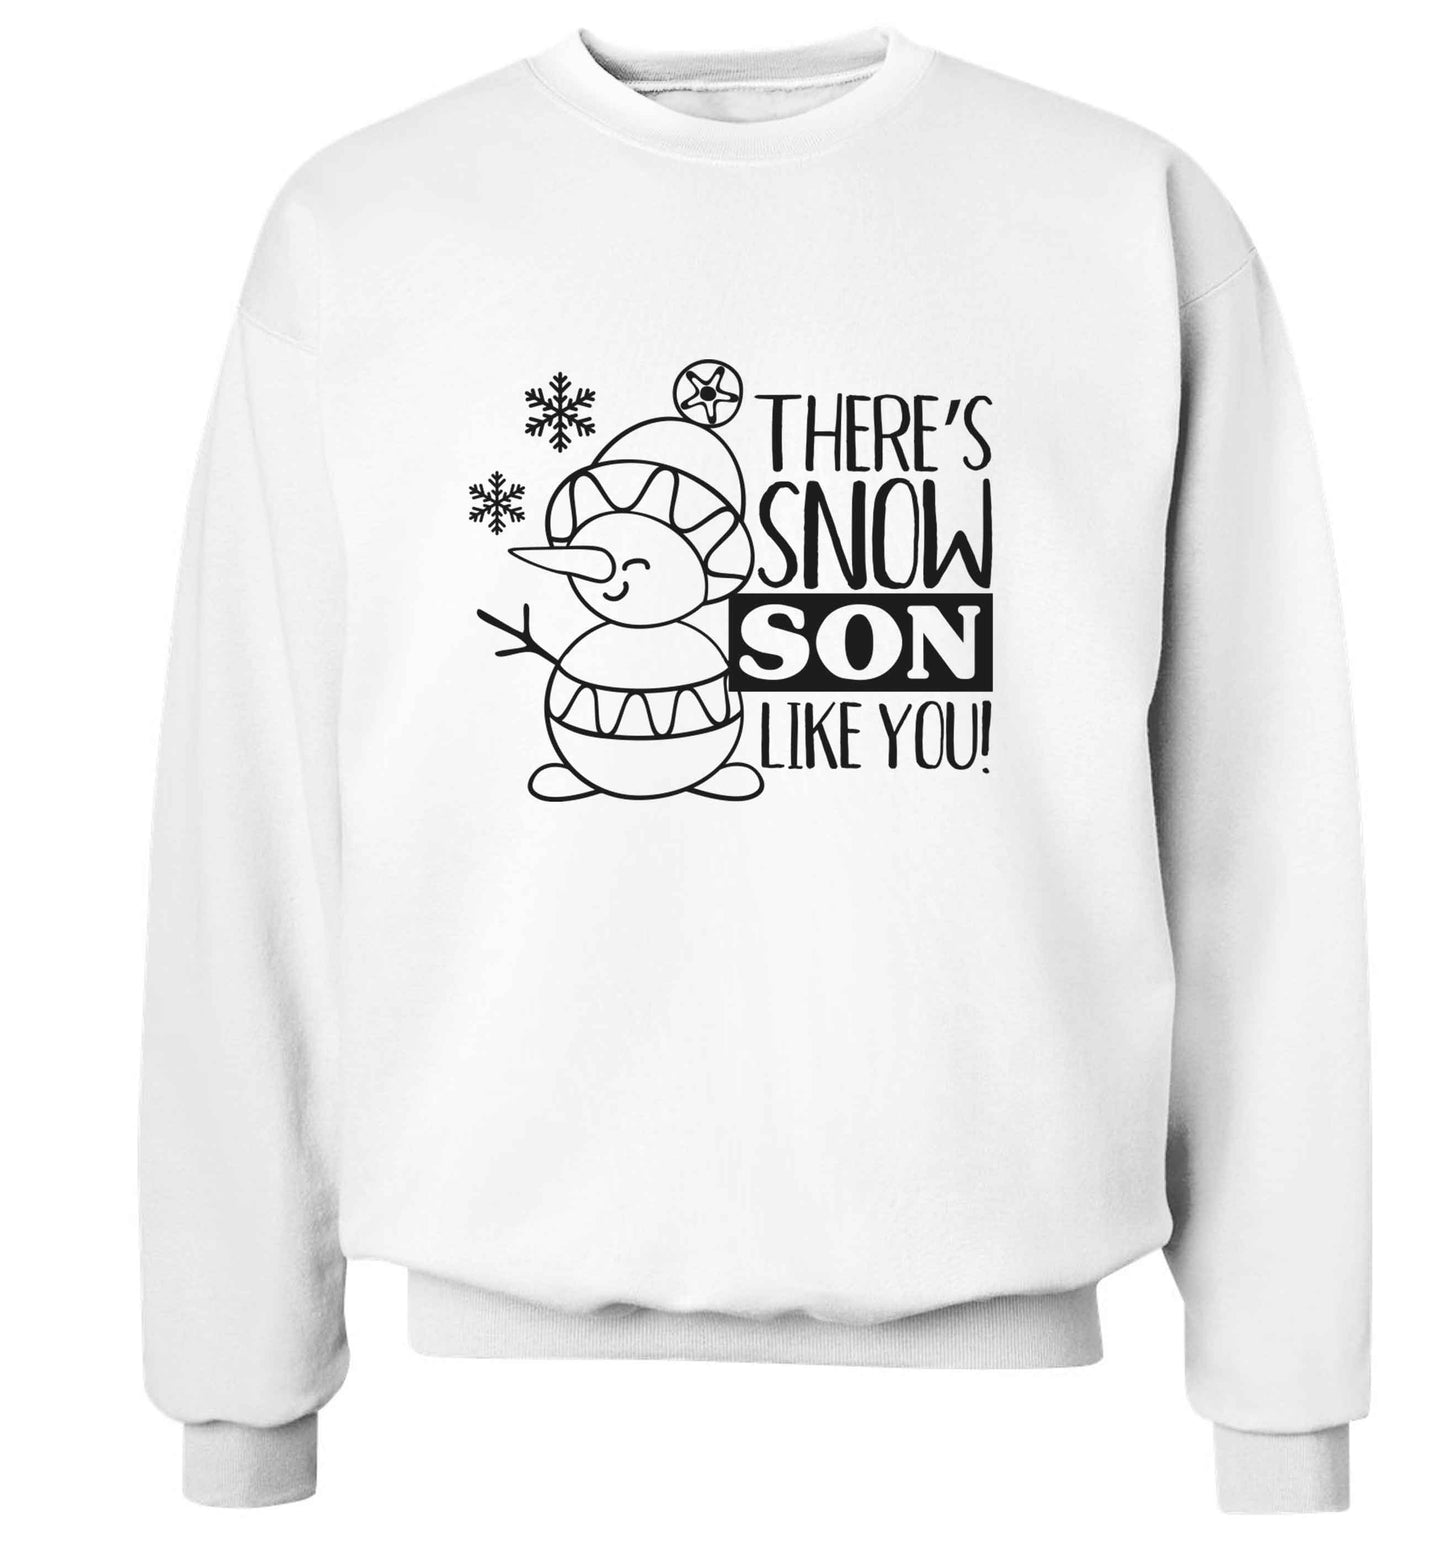 There's snow son like you adult's unisex white sweater 2XL